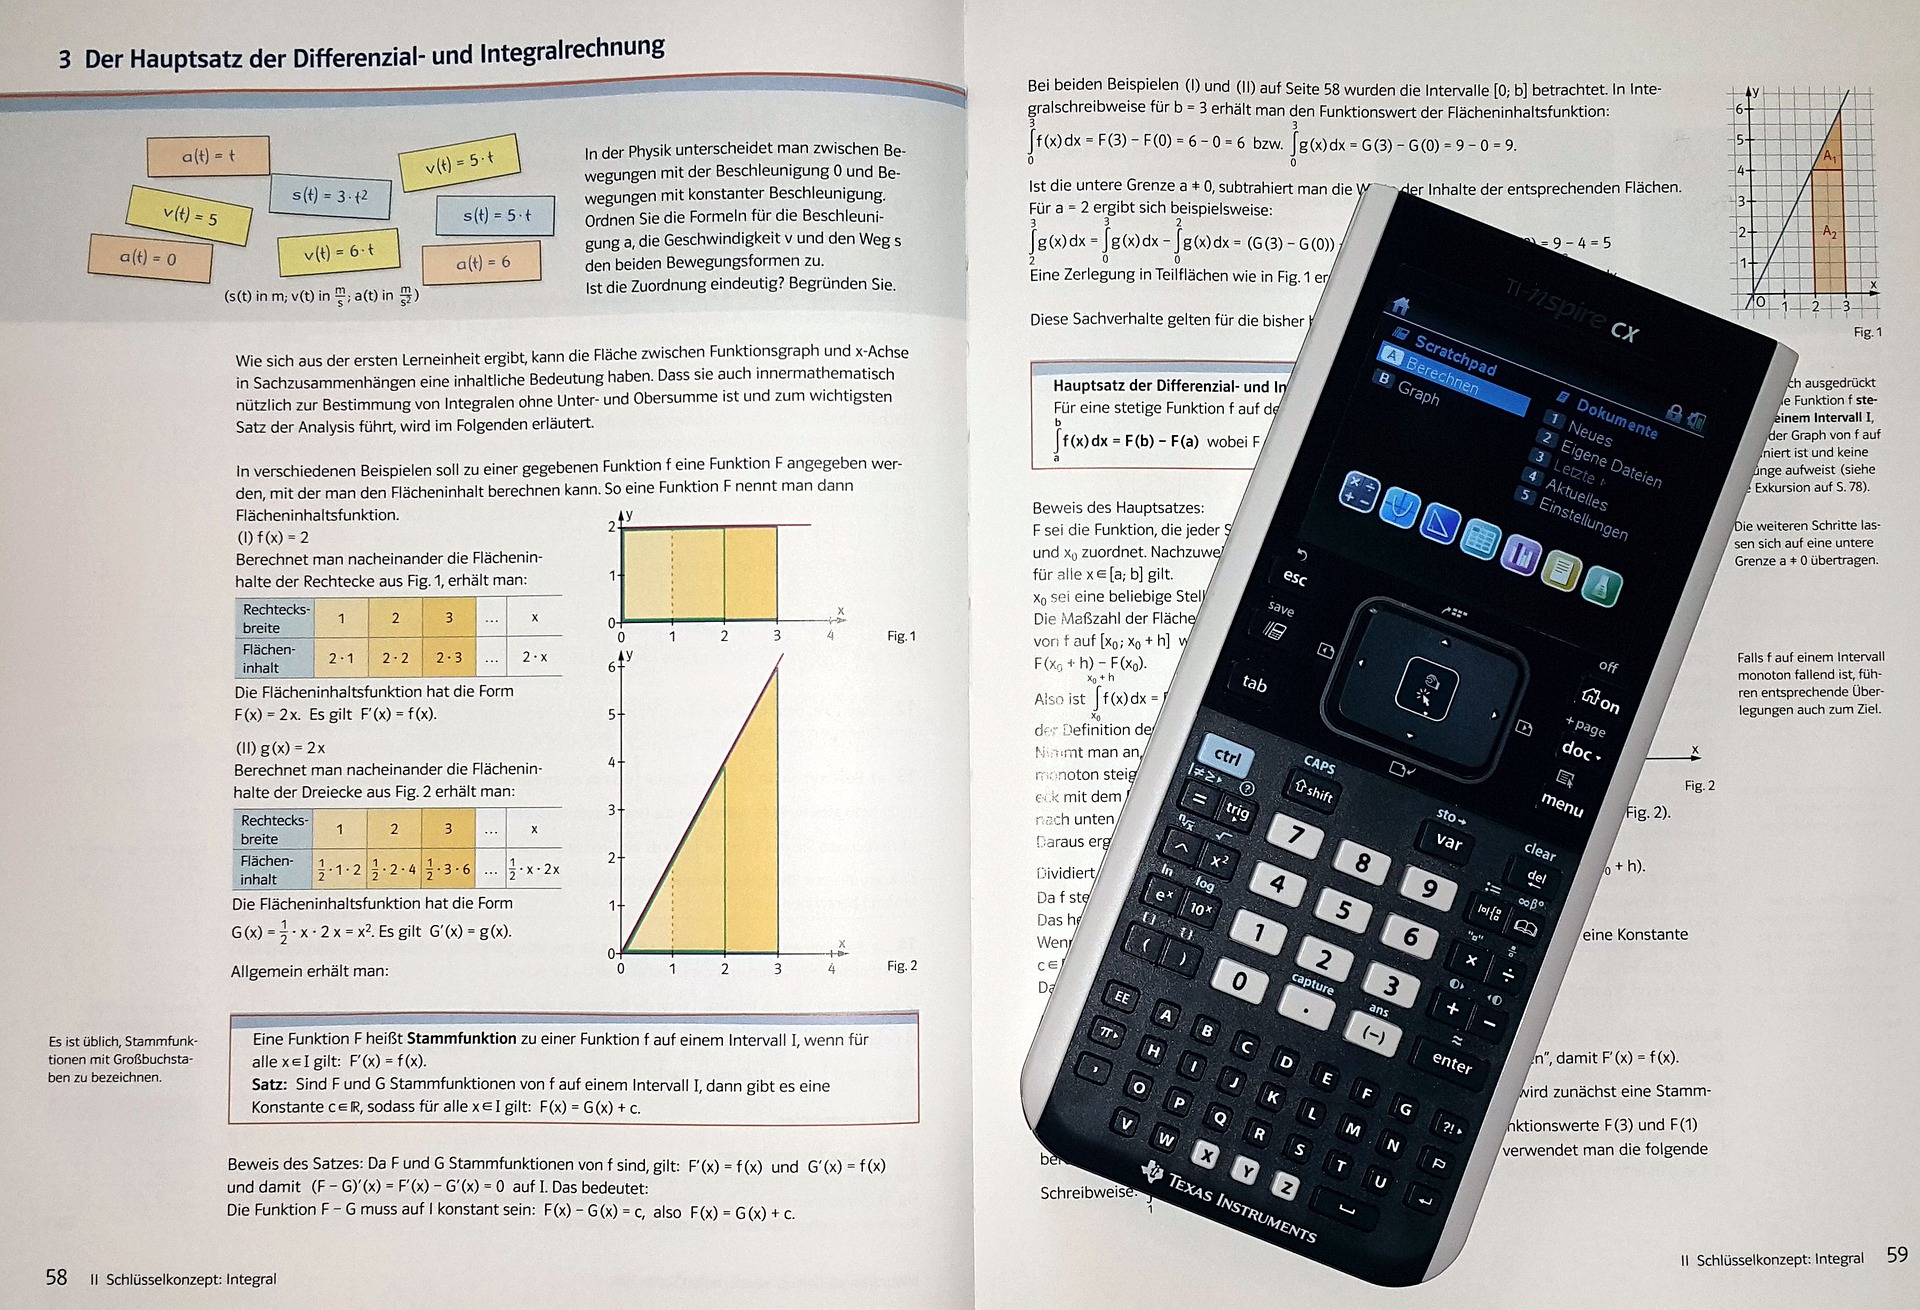 A photograph of a graphing calculator on top of an open math textbook.